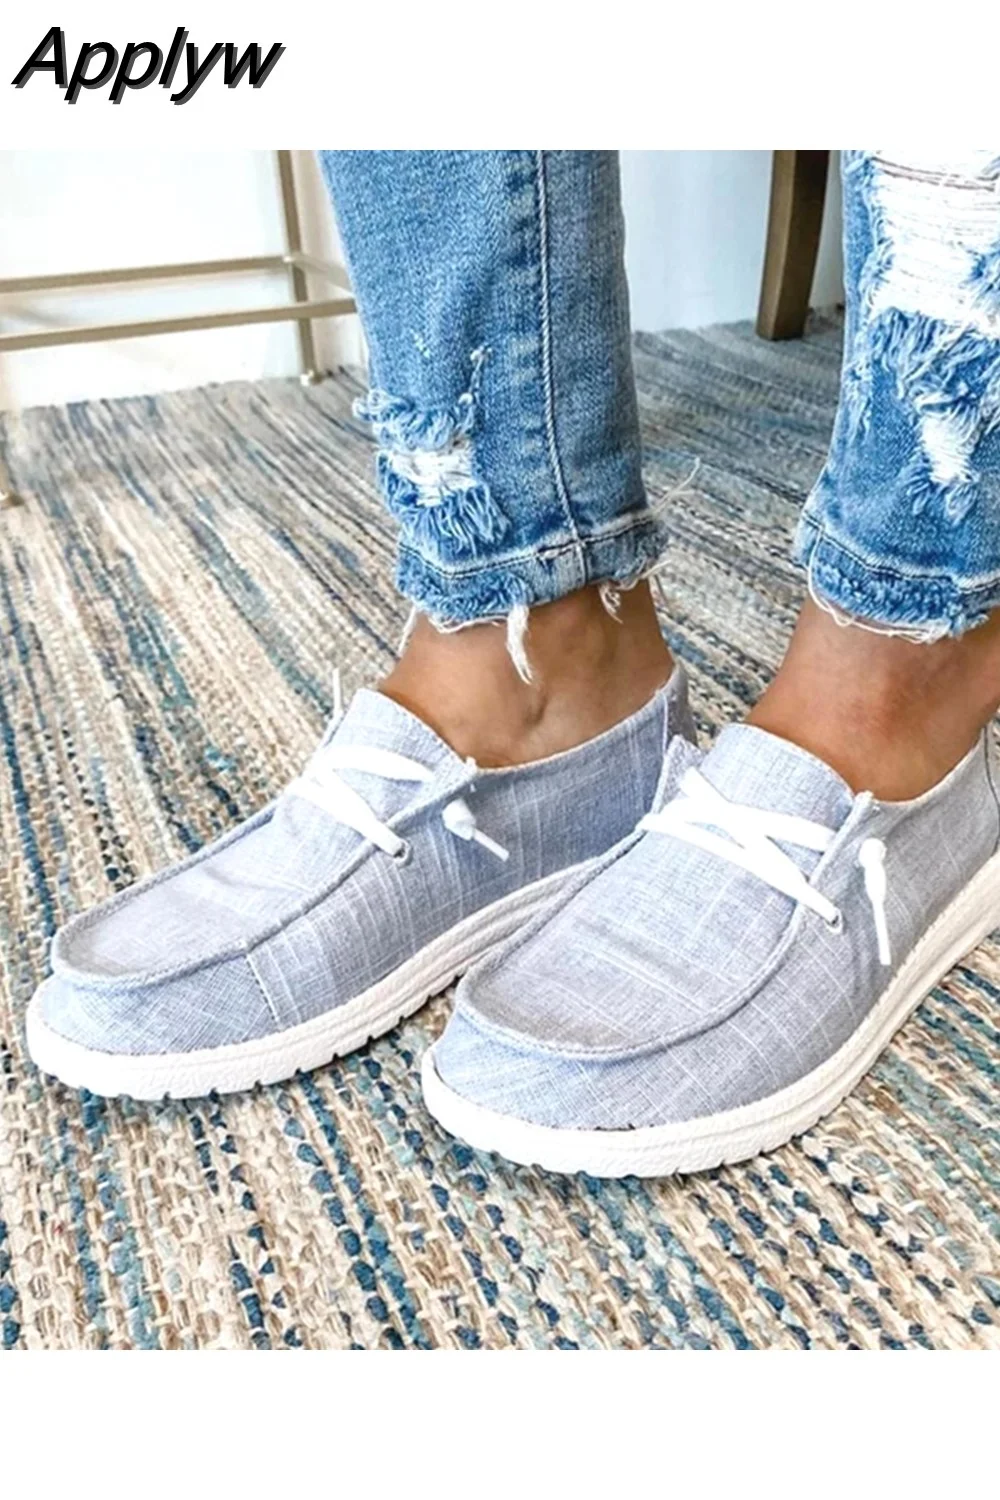 Applyw Shoes For Women Casual Shoes Lace Up Lofers Ladies Summer Women Slip On Sneakers Mocassin Femme Zapatos De Mujer 2023